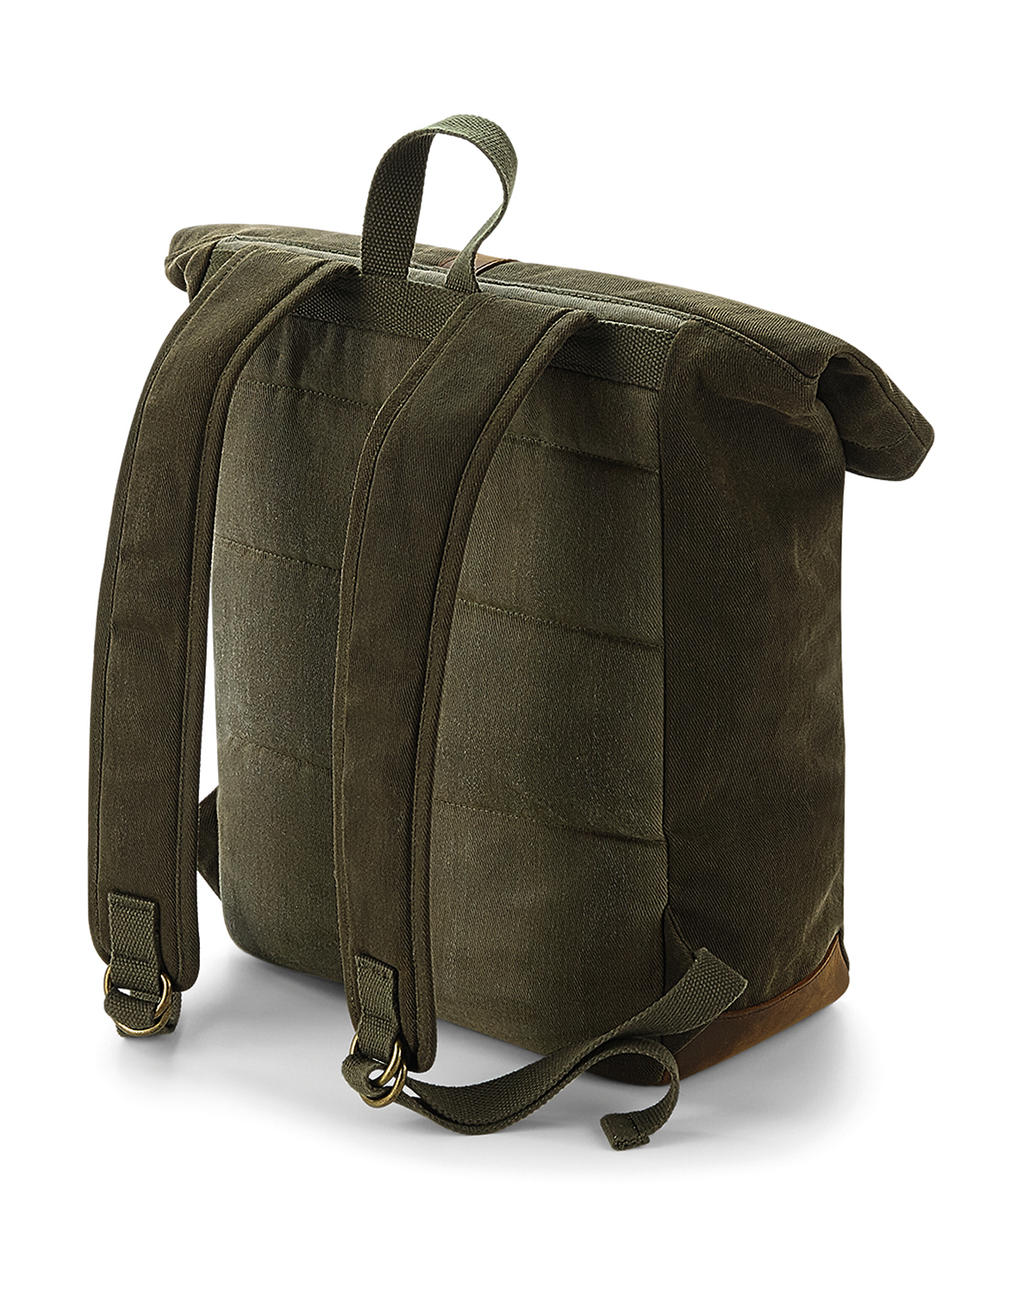  Heritage Waxed Canvas Backpack in Farbe Black